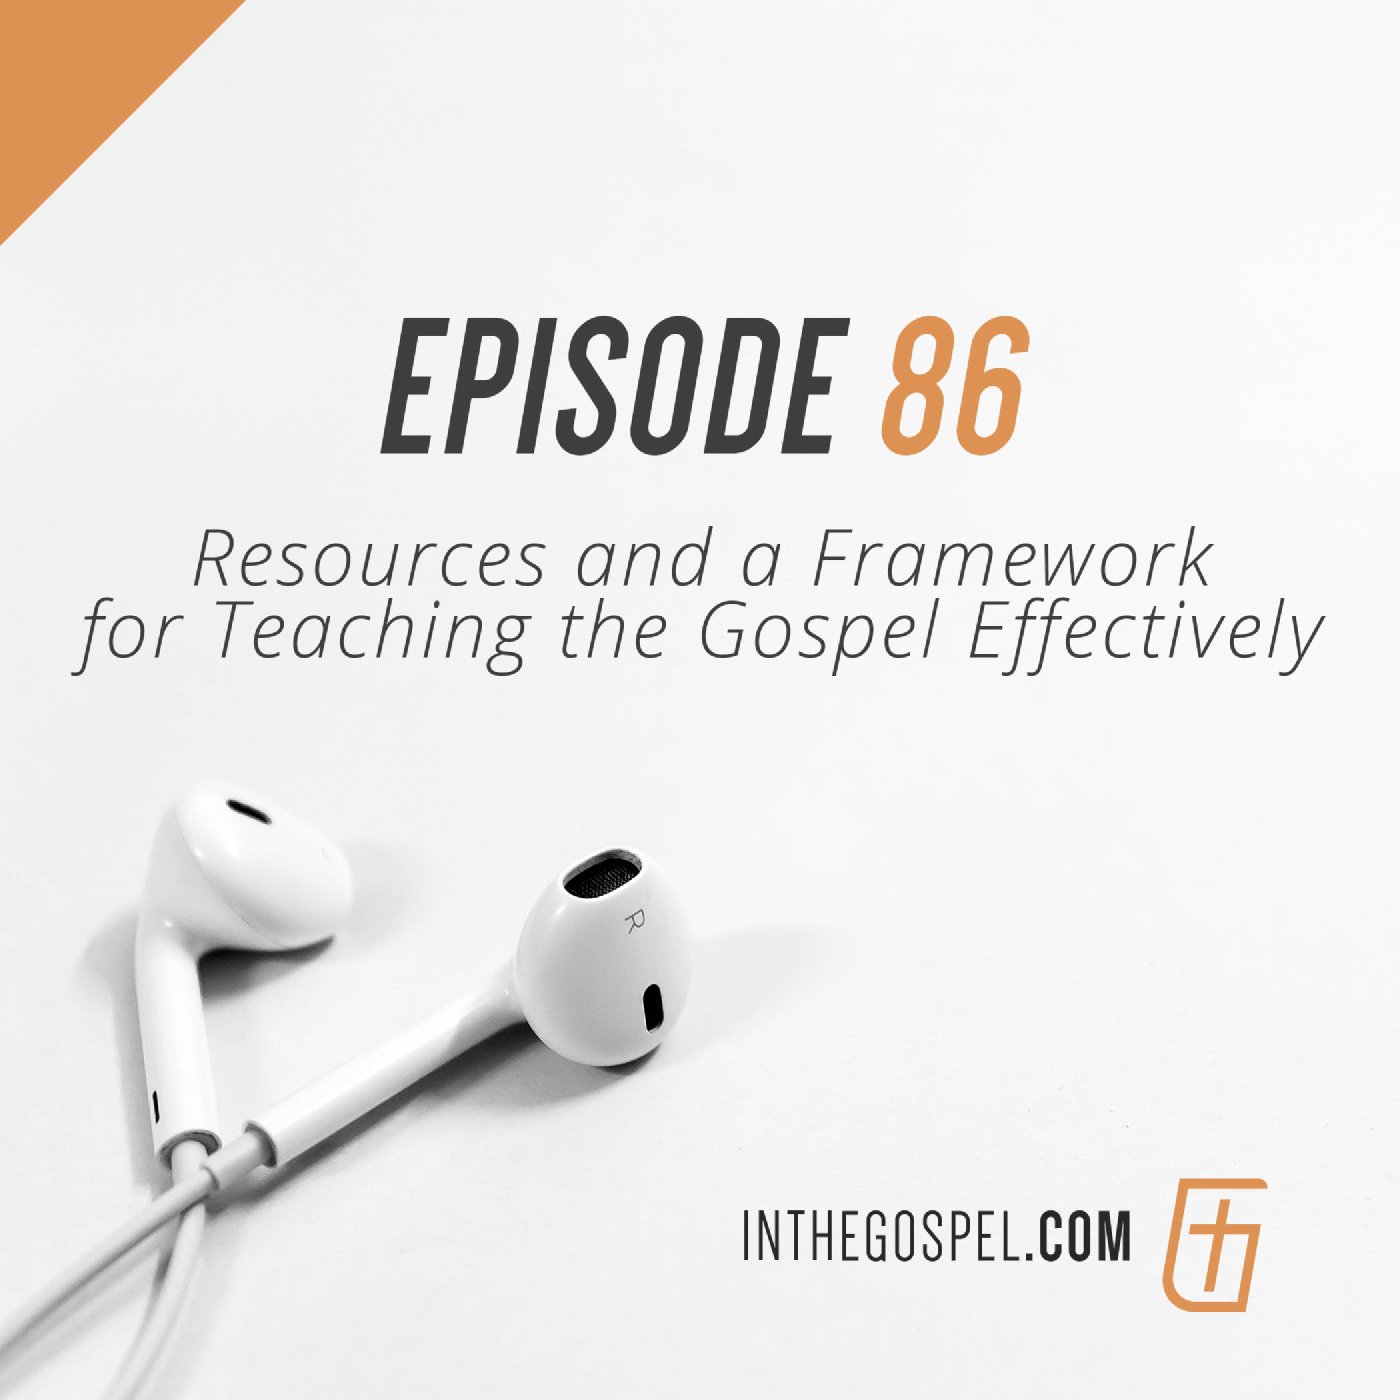 Episode 86: Resources and a Framework for Teaching the Gospel Effectively